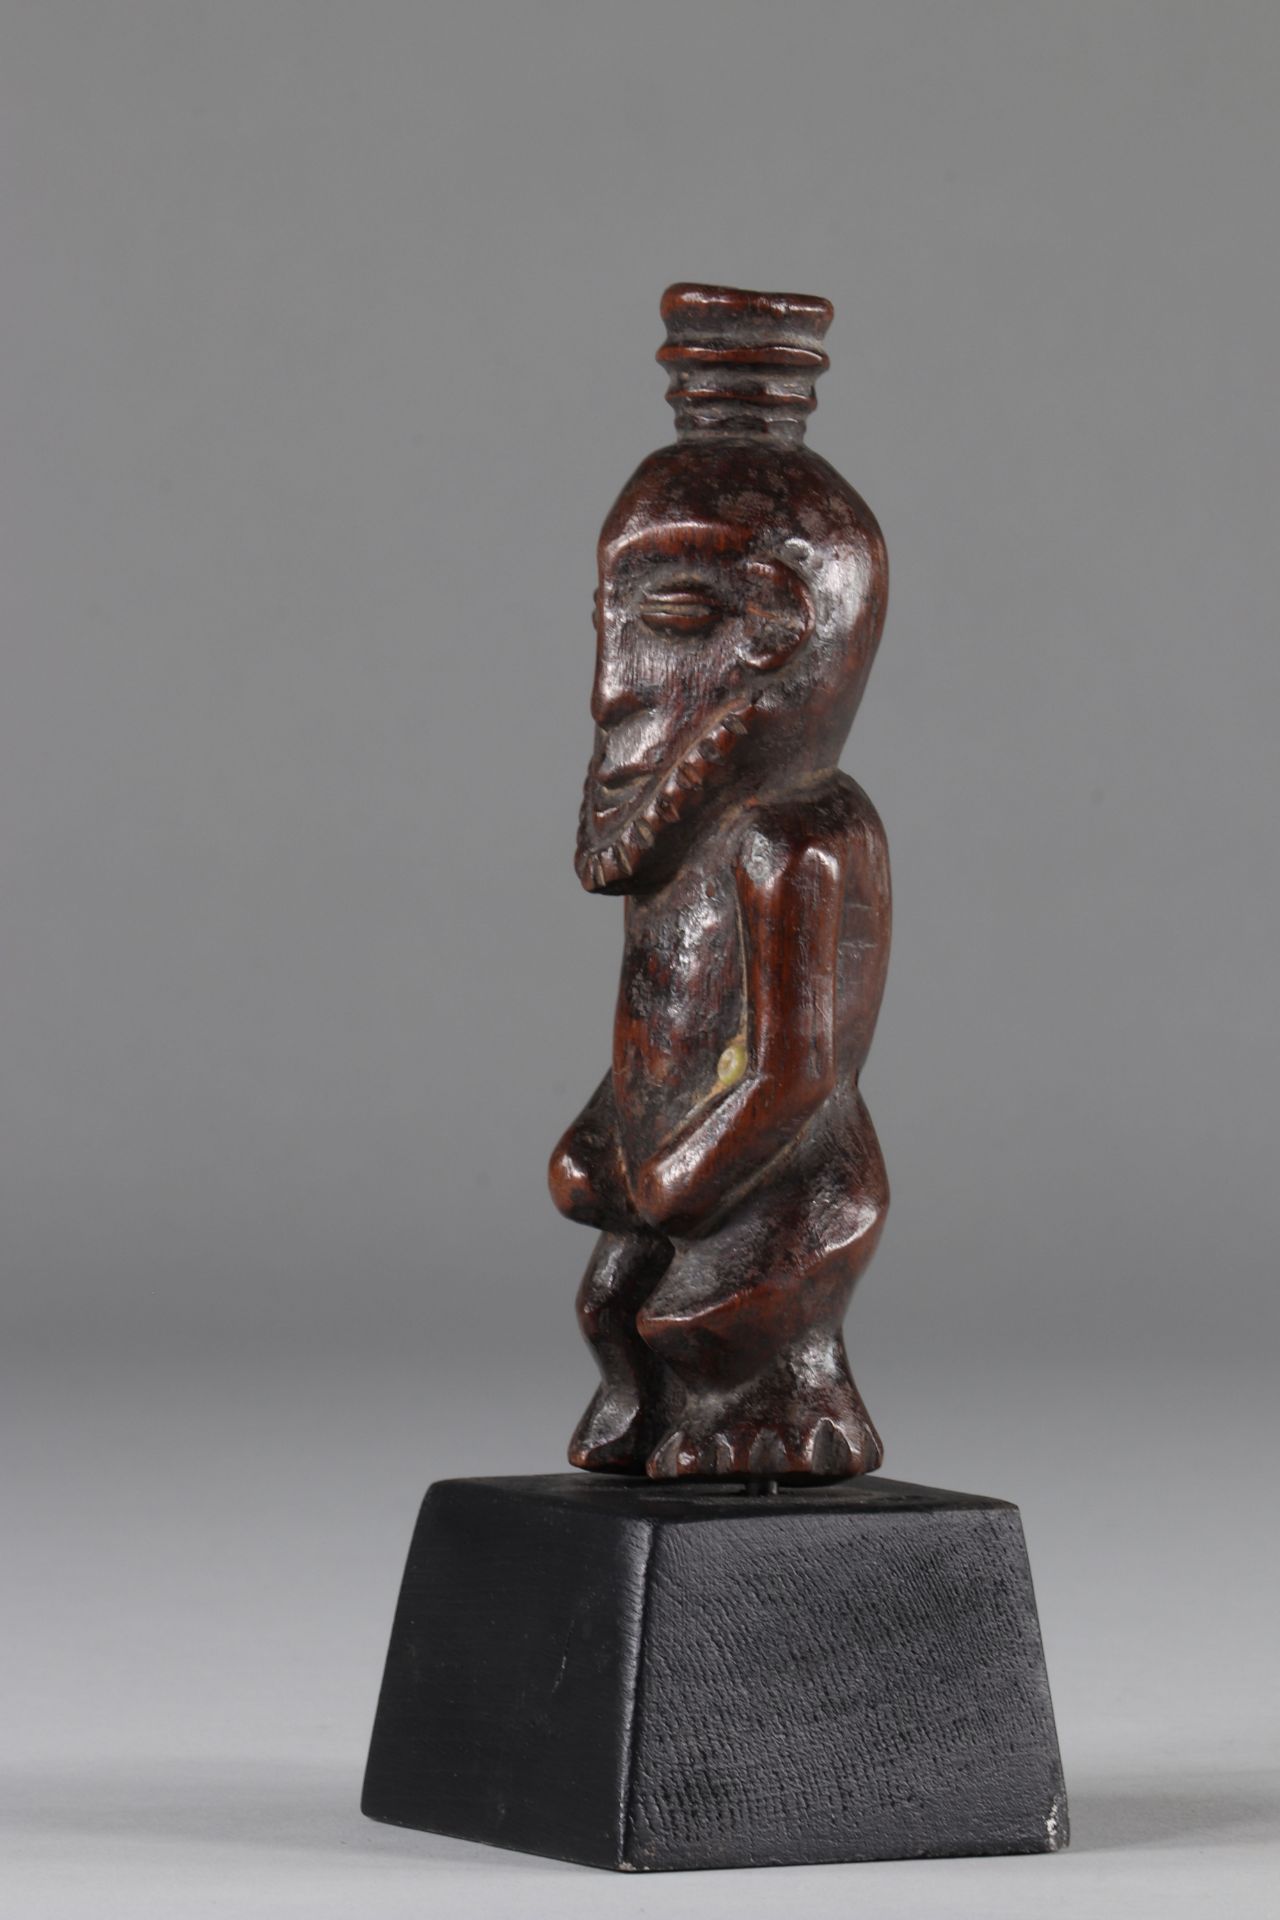 Kusu, DRC, Fetish representing wisdom, wood, glass beads, old patina of use, late 19th early 20th ce - Image 4 of 4